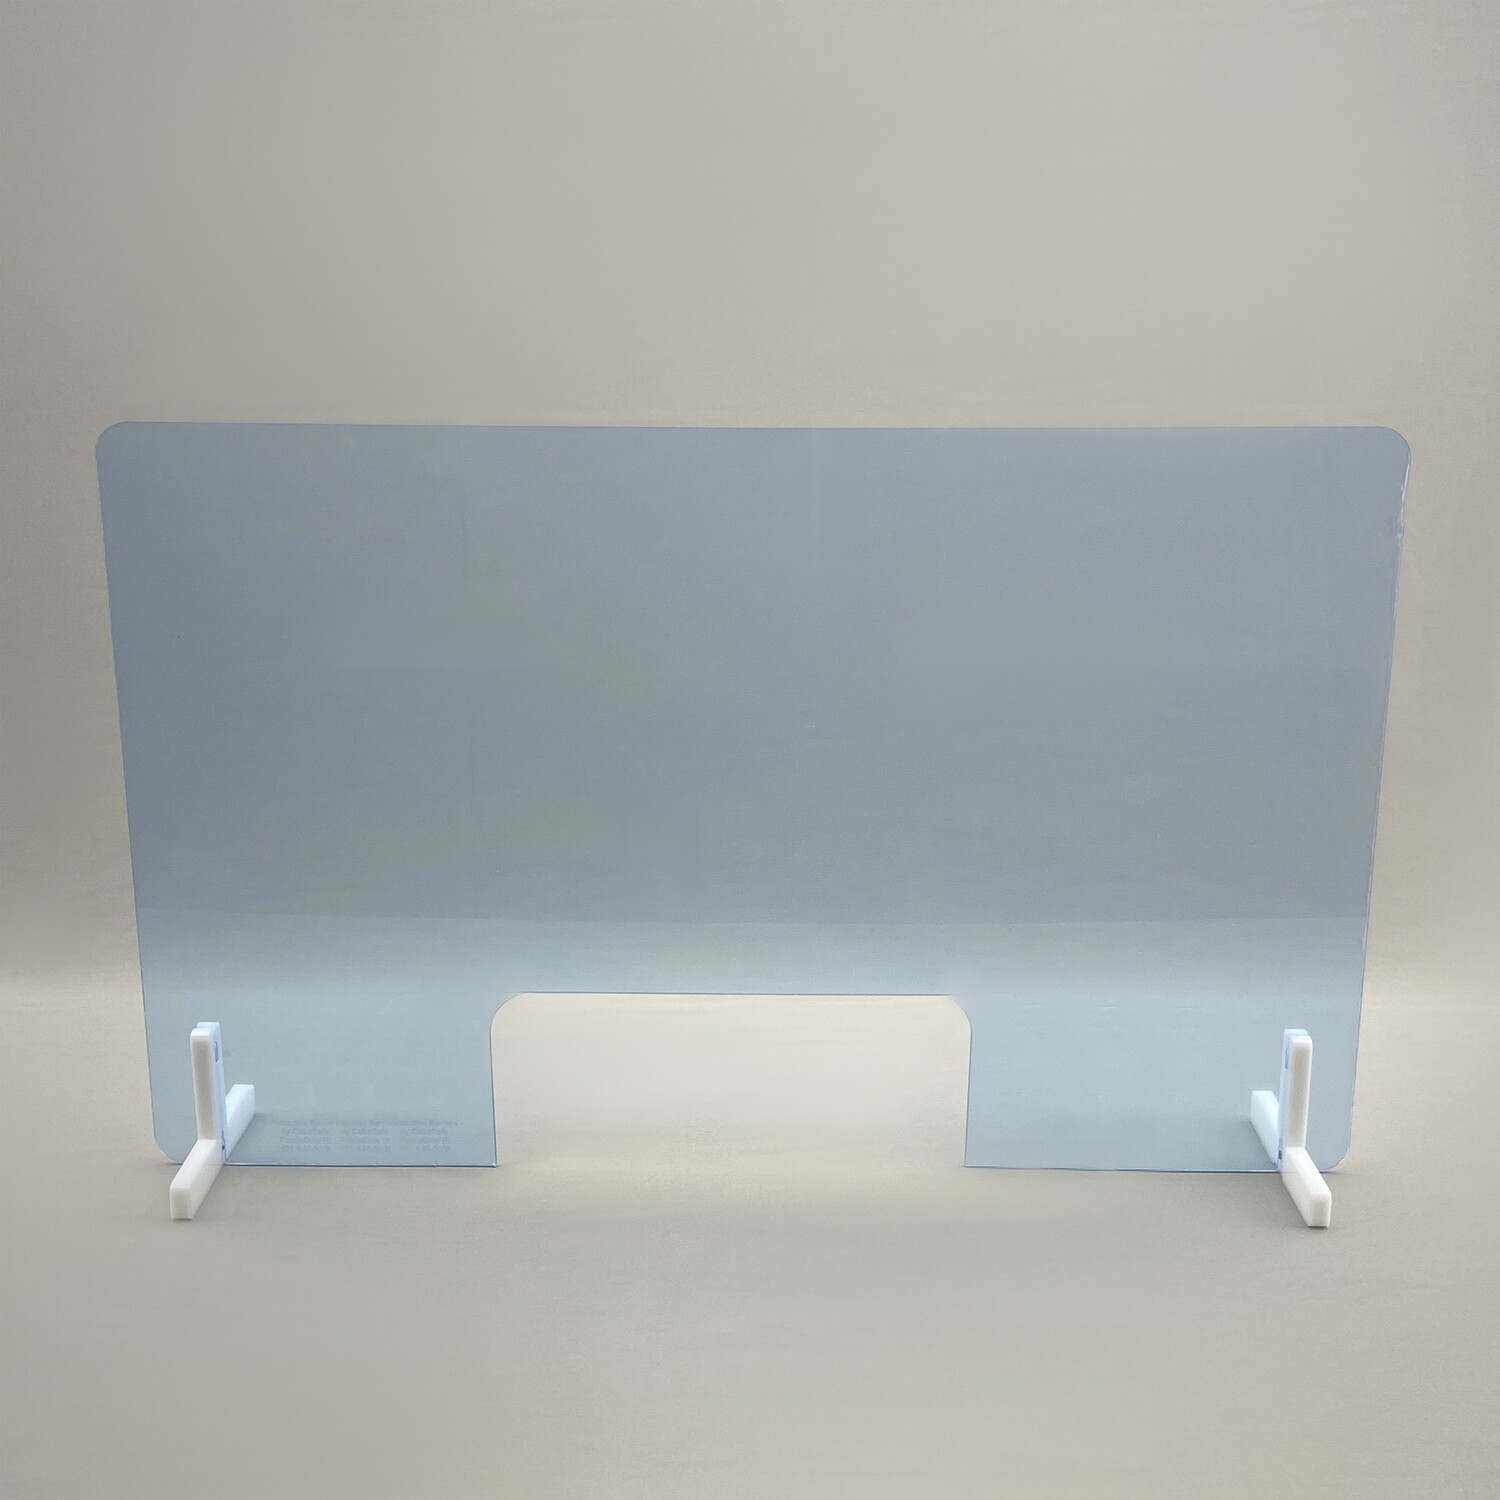 30 x 20 inch Free Standing Acrylic Barrier with 12" x 5" Cutout